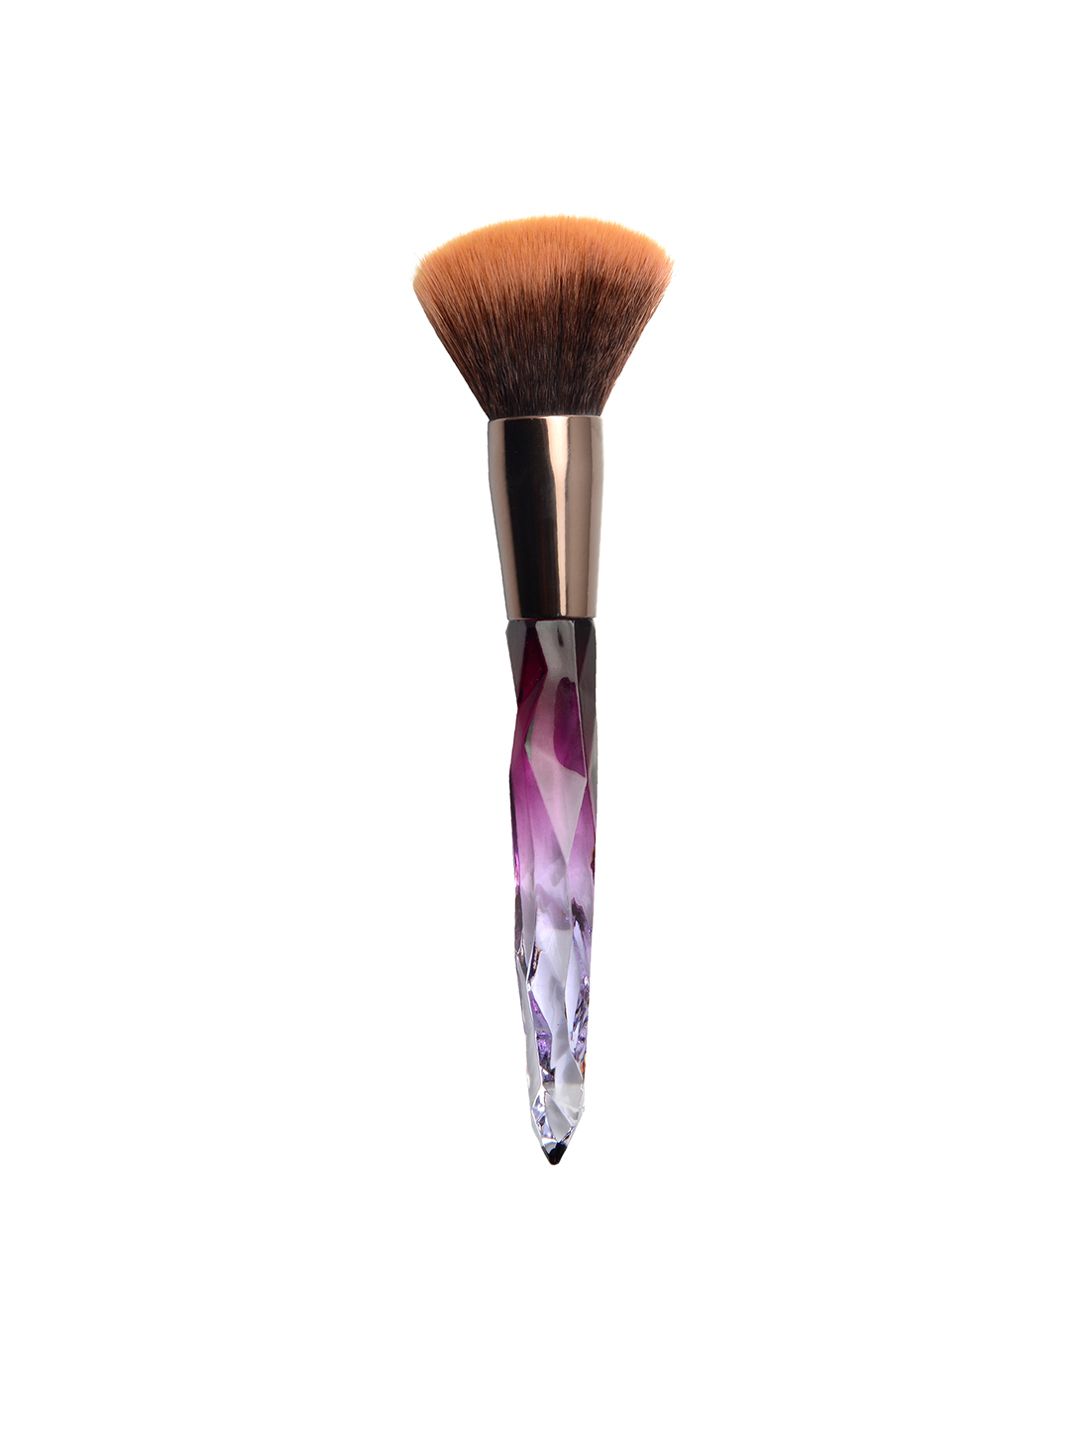 INCOLOR Exposed Makeup Brush Powder Blender 07 Price in India